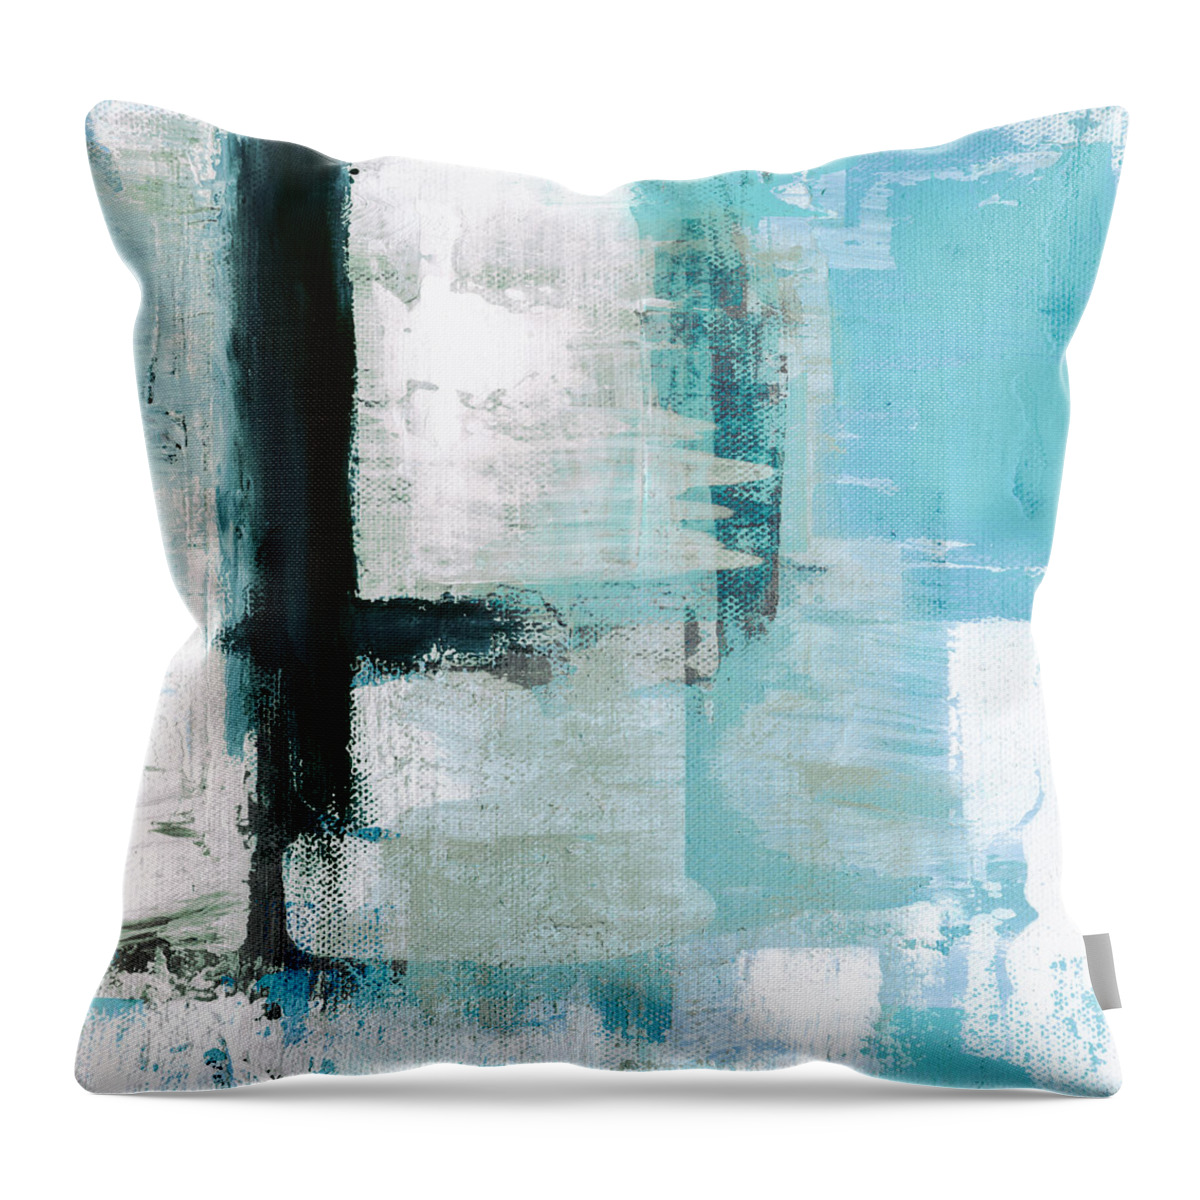 Abstract Throw Pillow featuring the mixed media Blue Light Of Day 1- Art by Linda Woods by Linda Woods